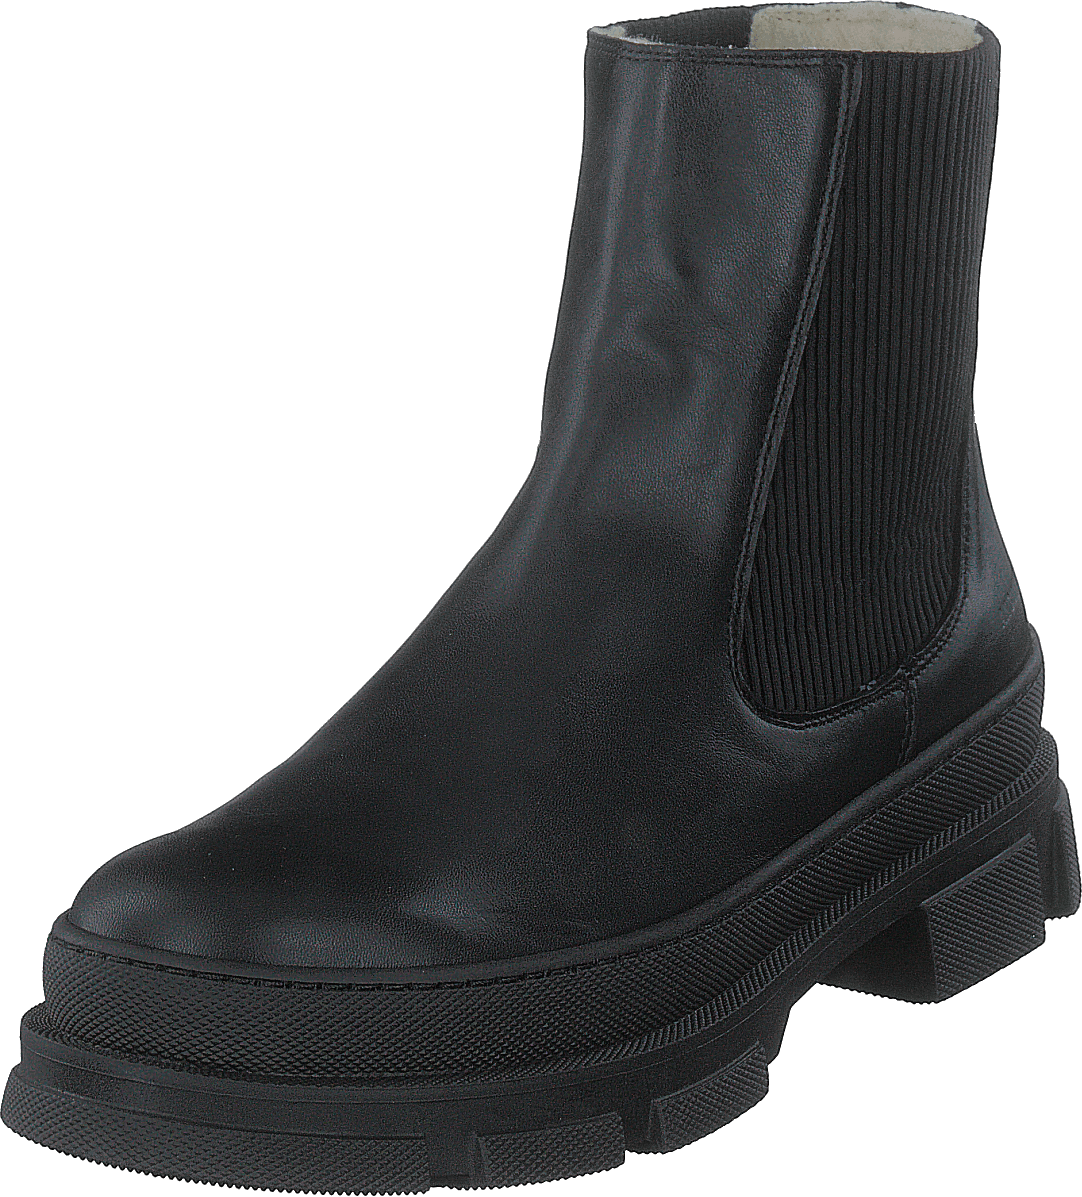 Chelsea Boot With Wool Lining 1604/019 Black/black